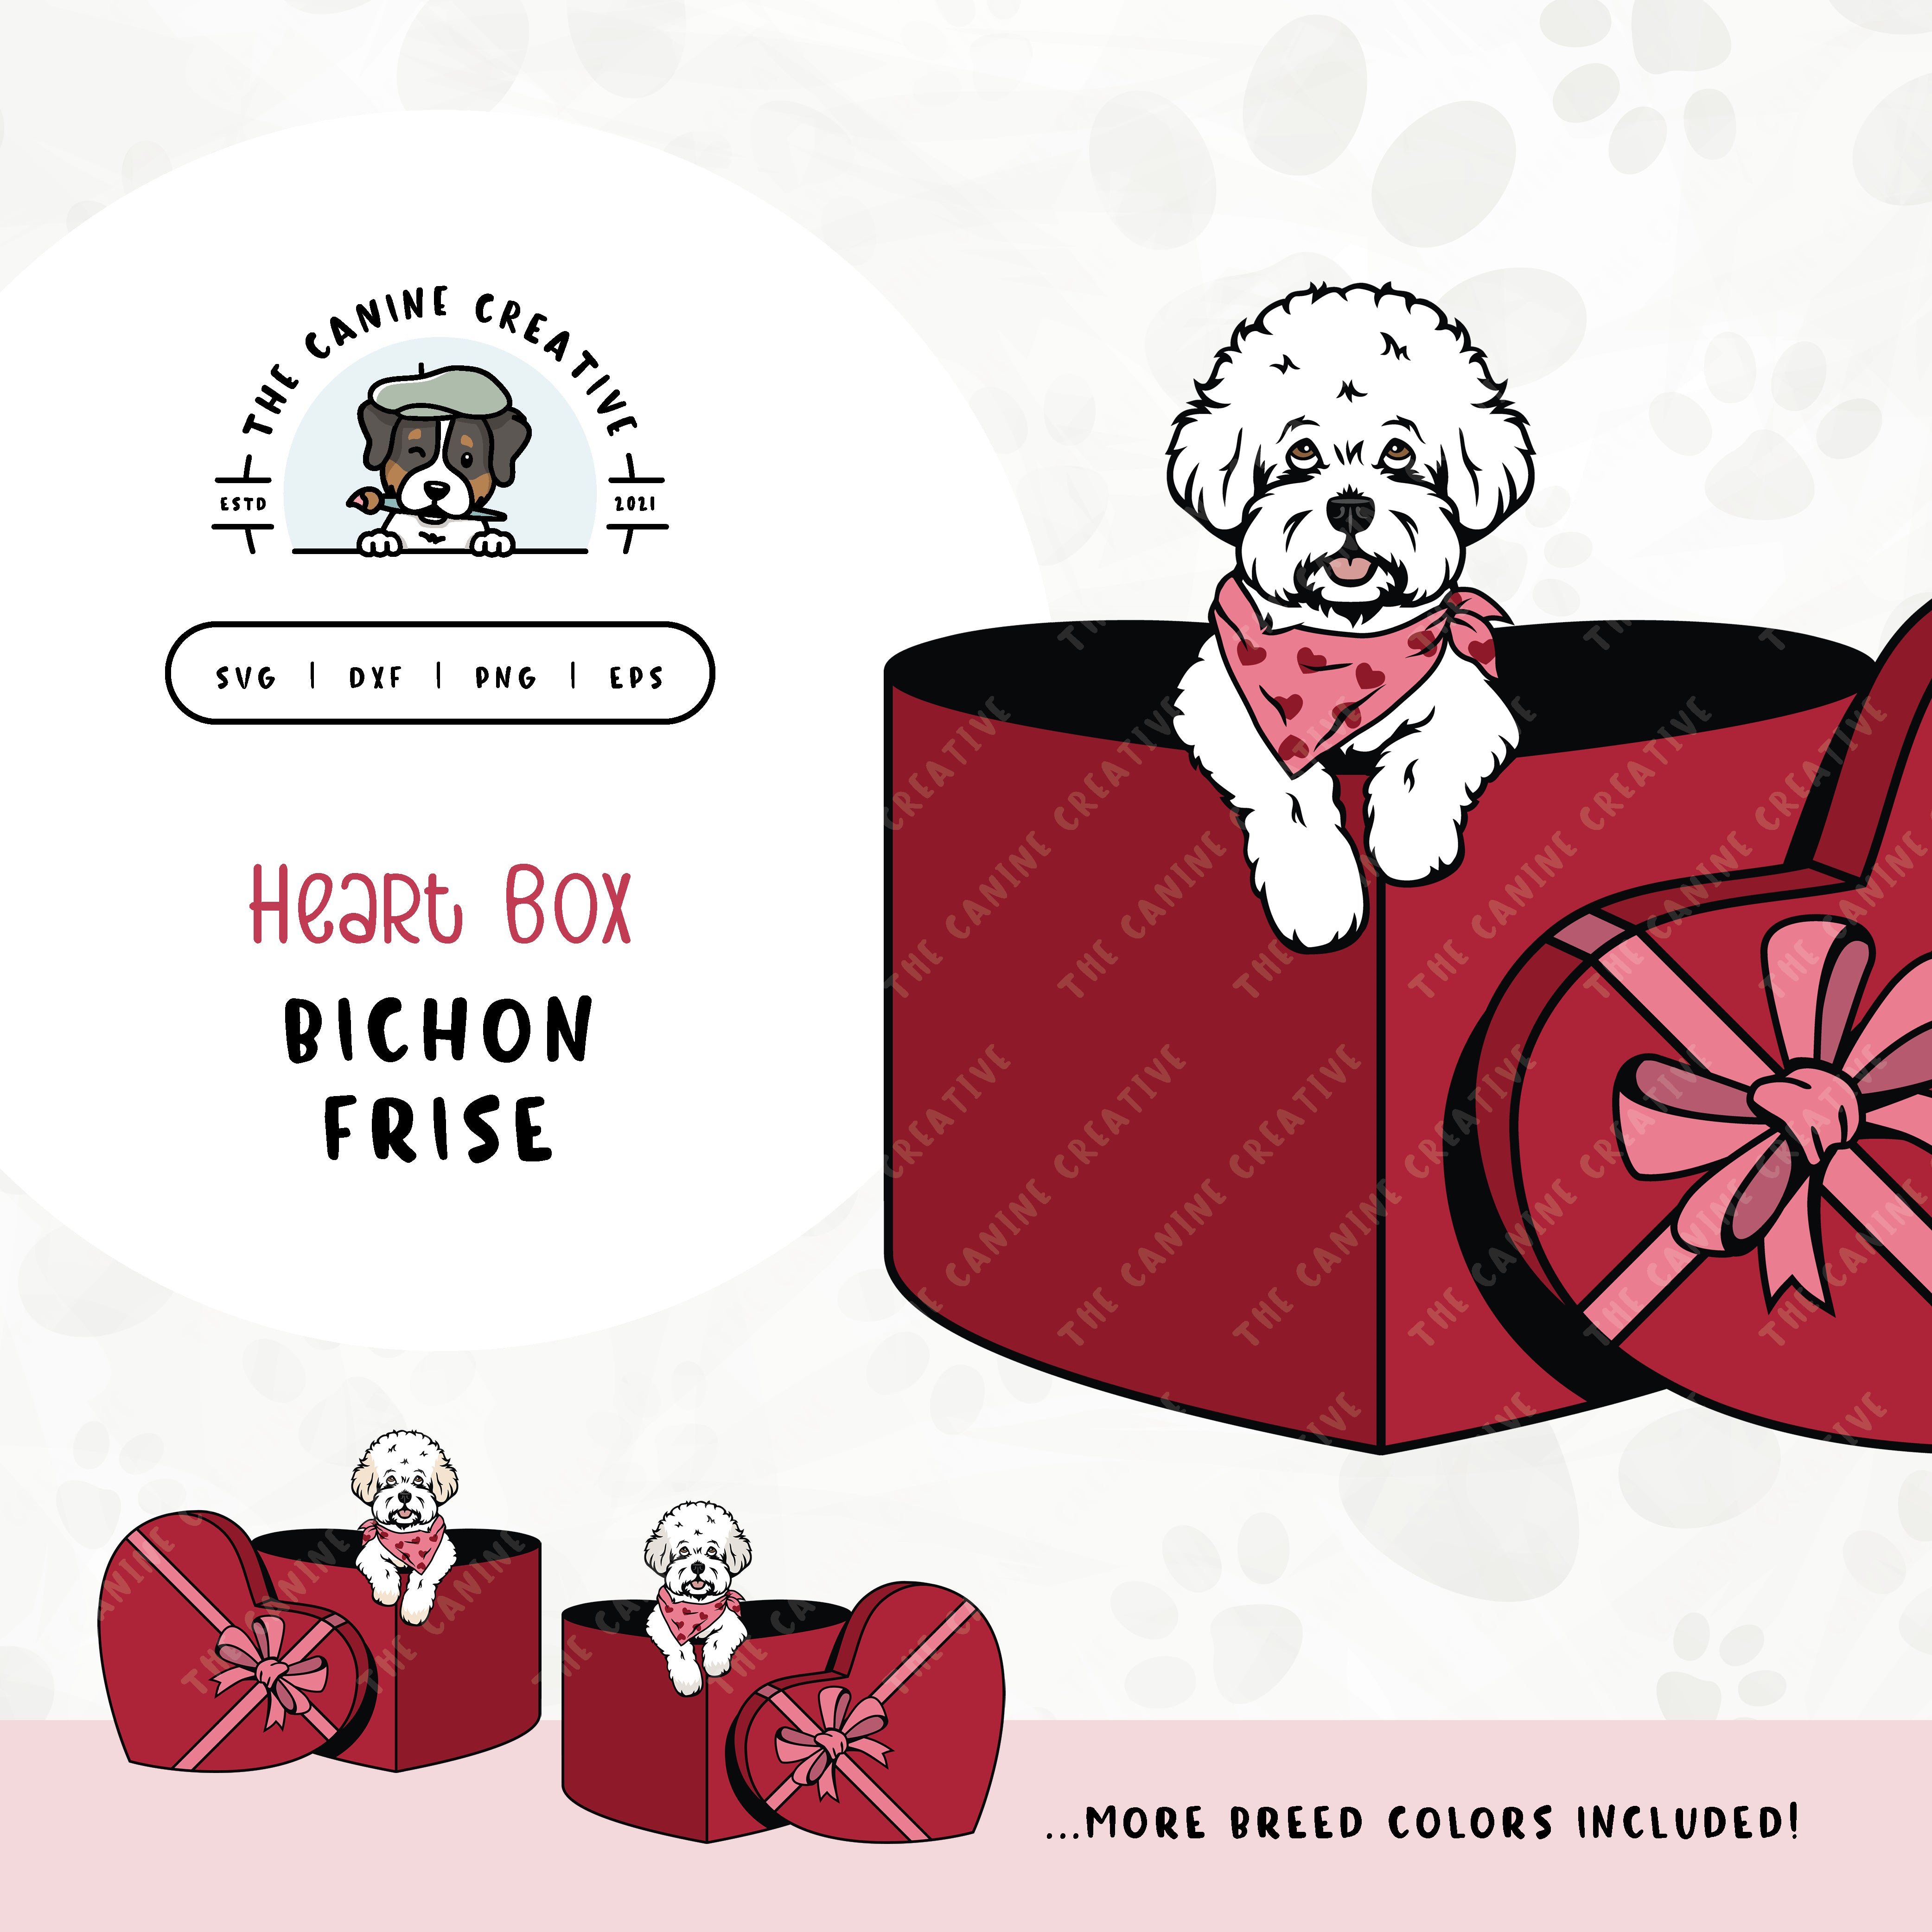 This charming Bichon Frise illustration features a peeking dog in a heart-shaped box. File formats include: SVG, DXF, PNG, and EPS.